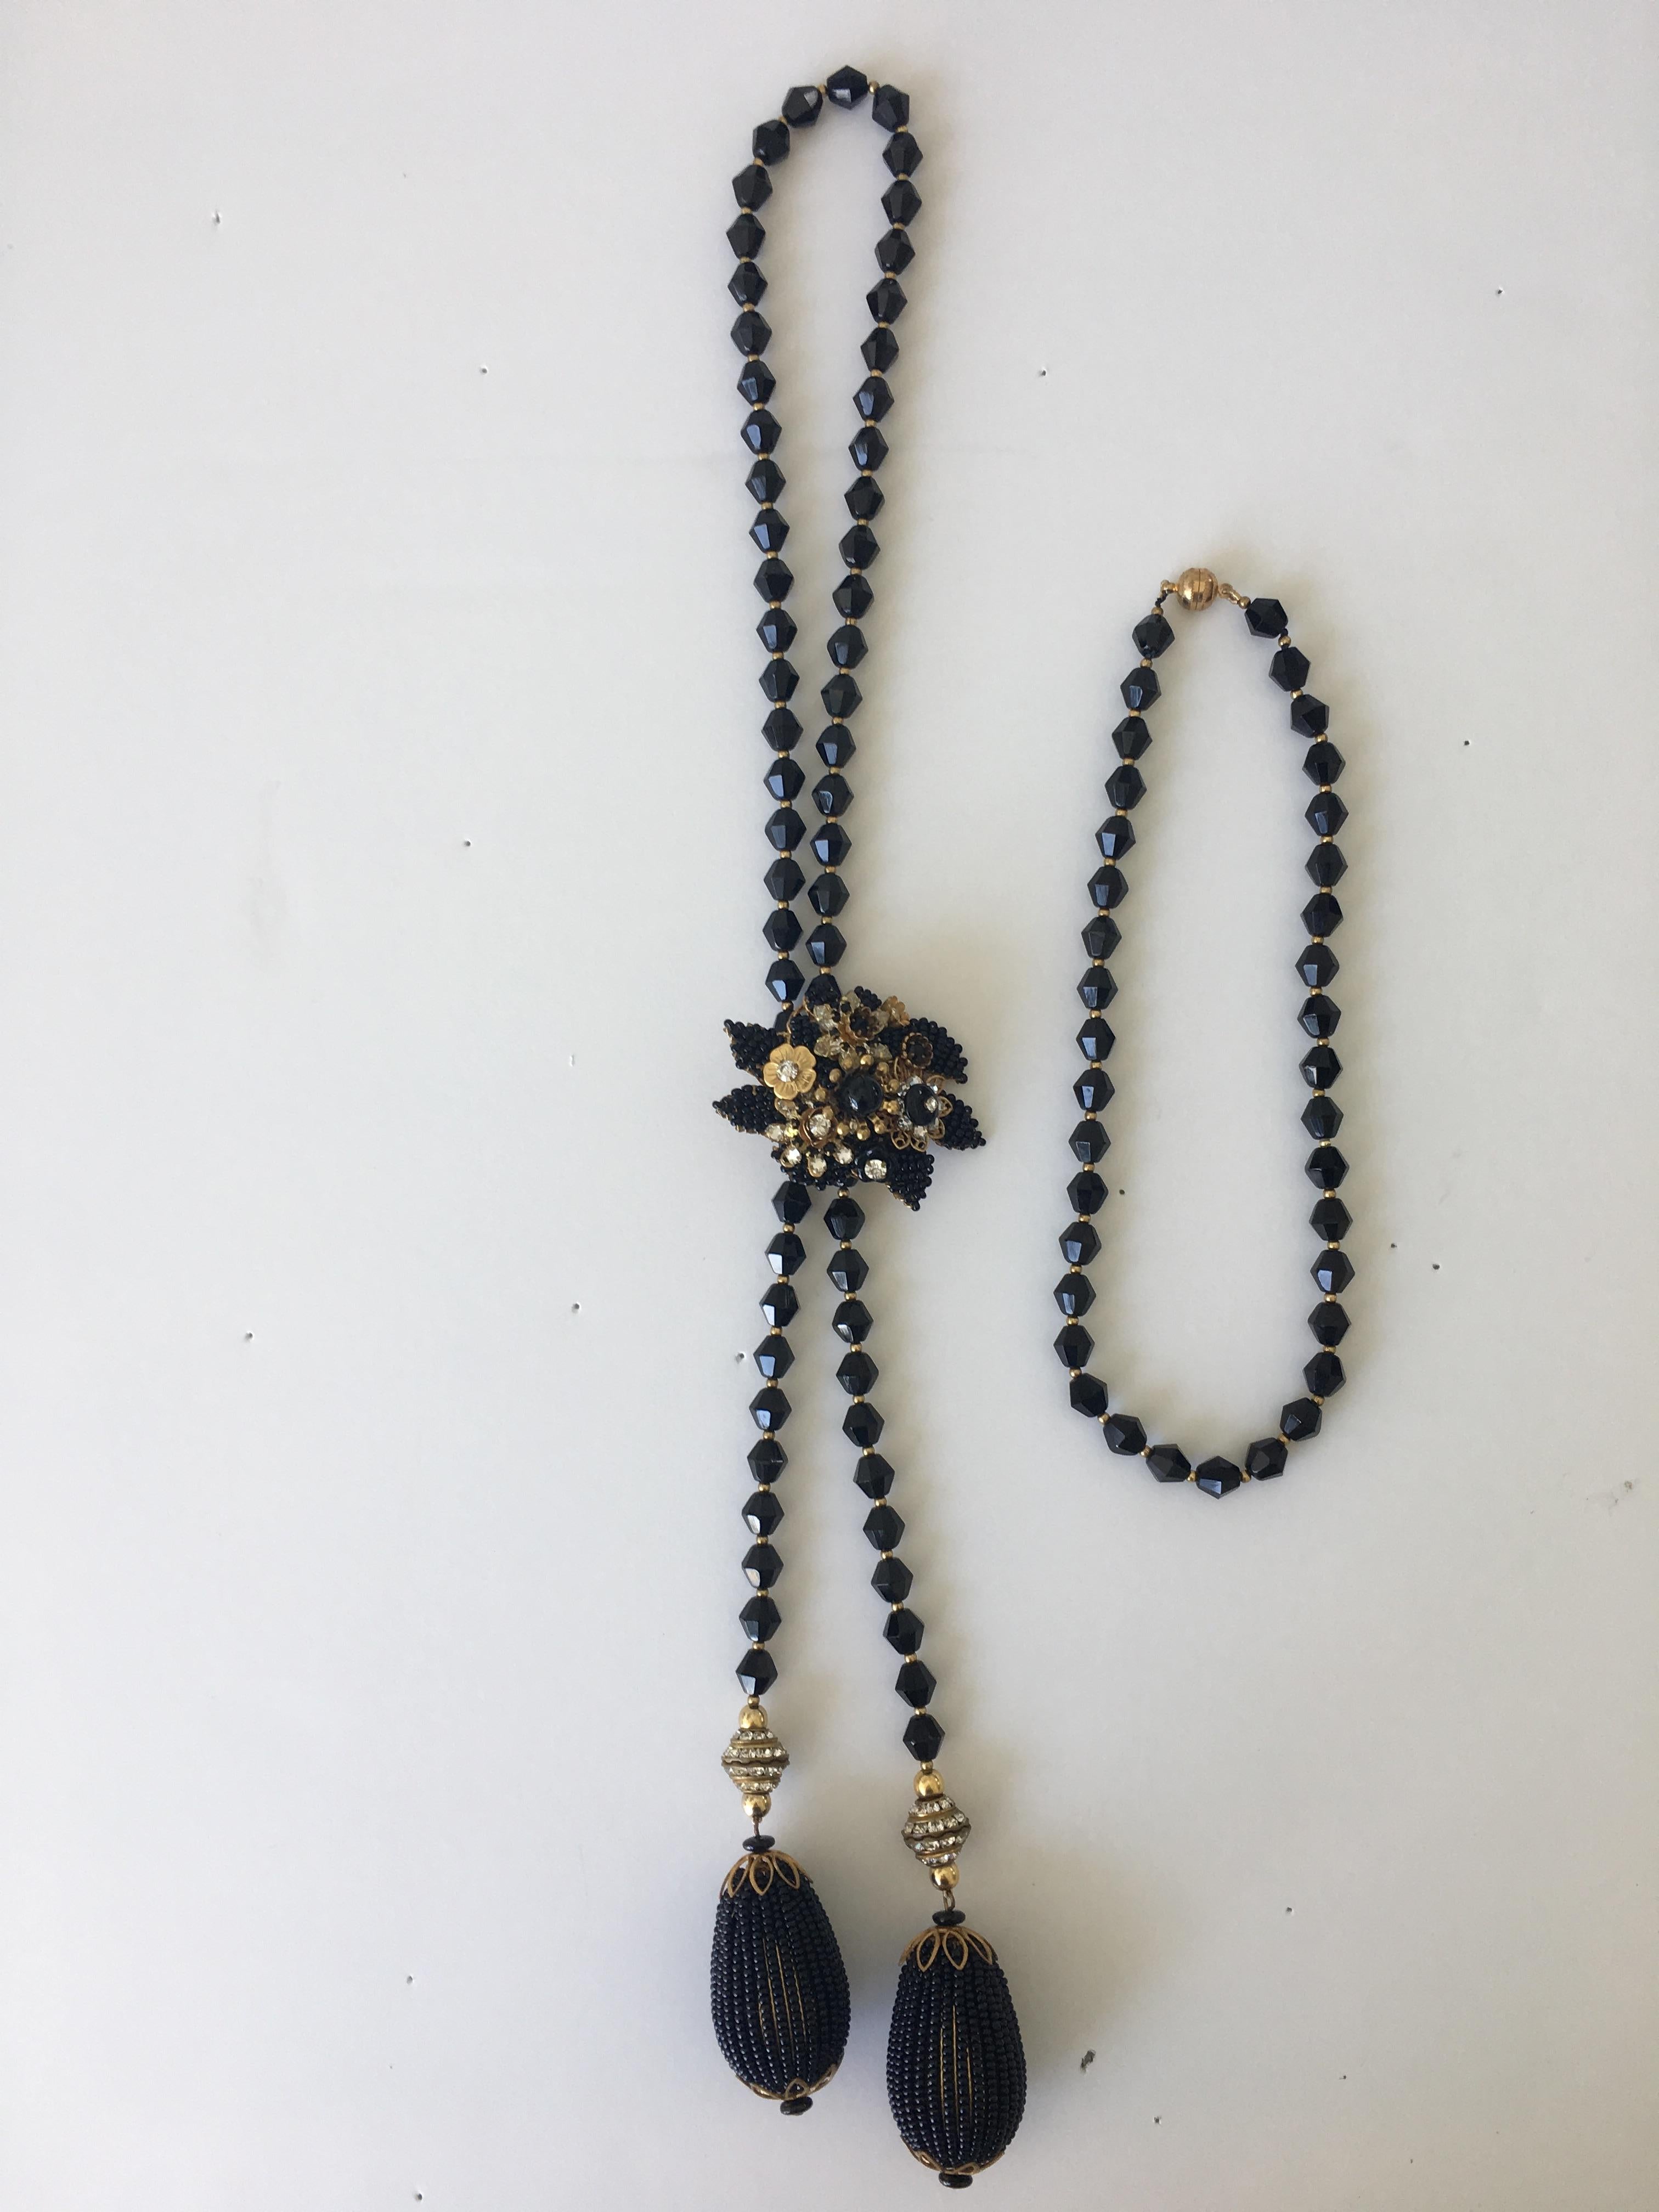 20th century vintage costume black bead and crystal lariat, choker and clip brooch, Probably Hagler.
This stunning Lariat necklace comes with an additional choker length necklace and the a separate clip brooch to hold the lariat in place. It has